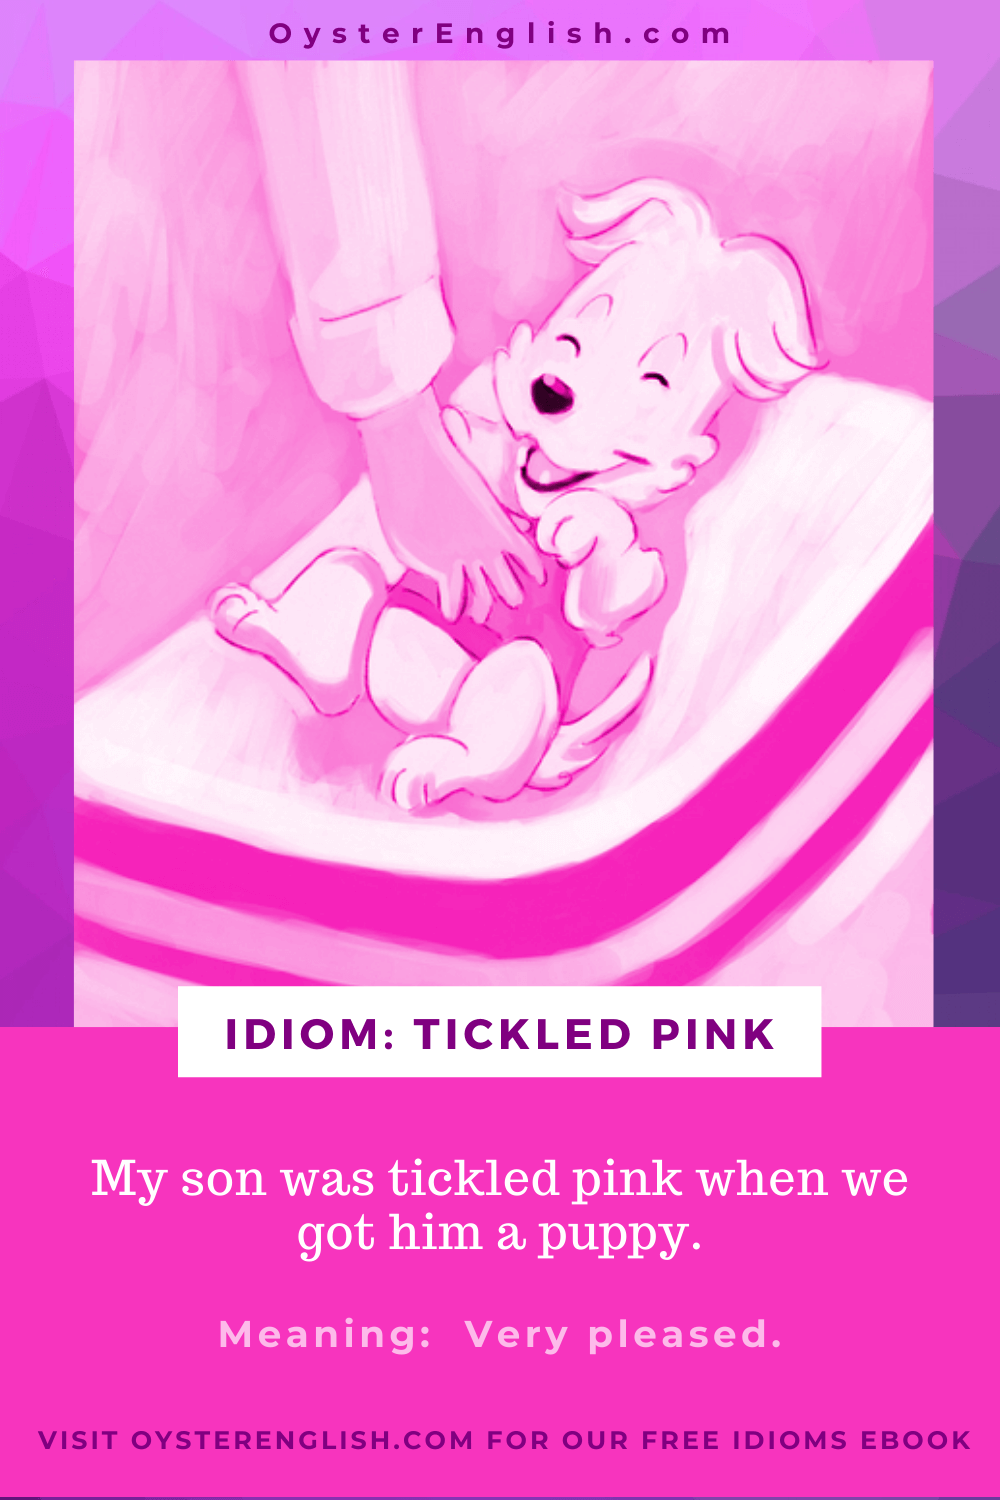 A pink colored image of hand tickling the stomach of a laughing puppy with the caption: "My son was tickled pink when we got him a pupply."